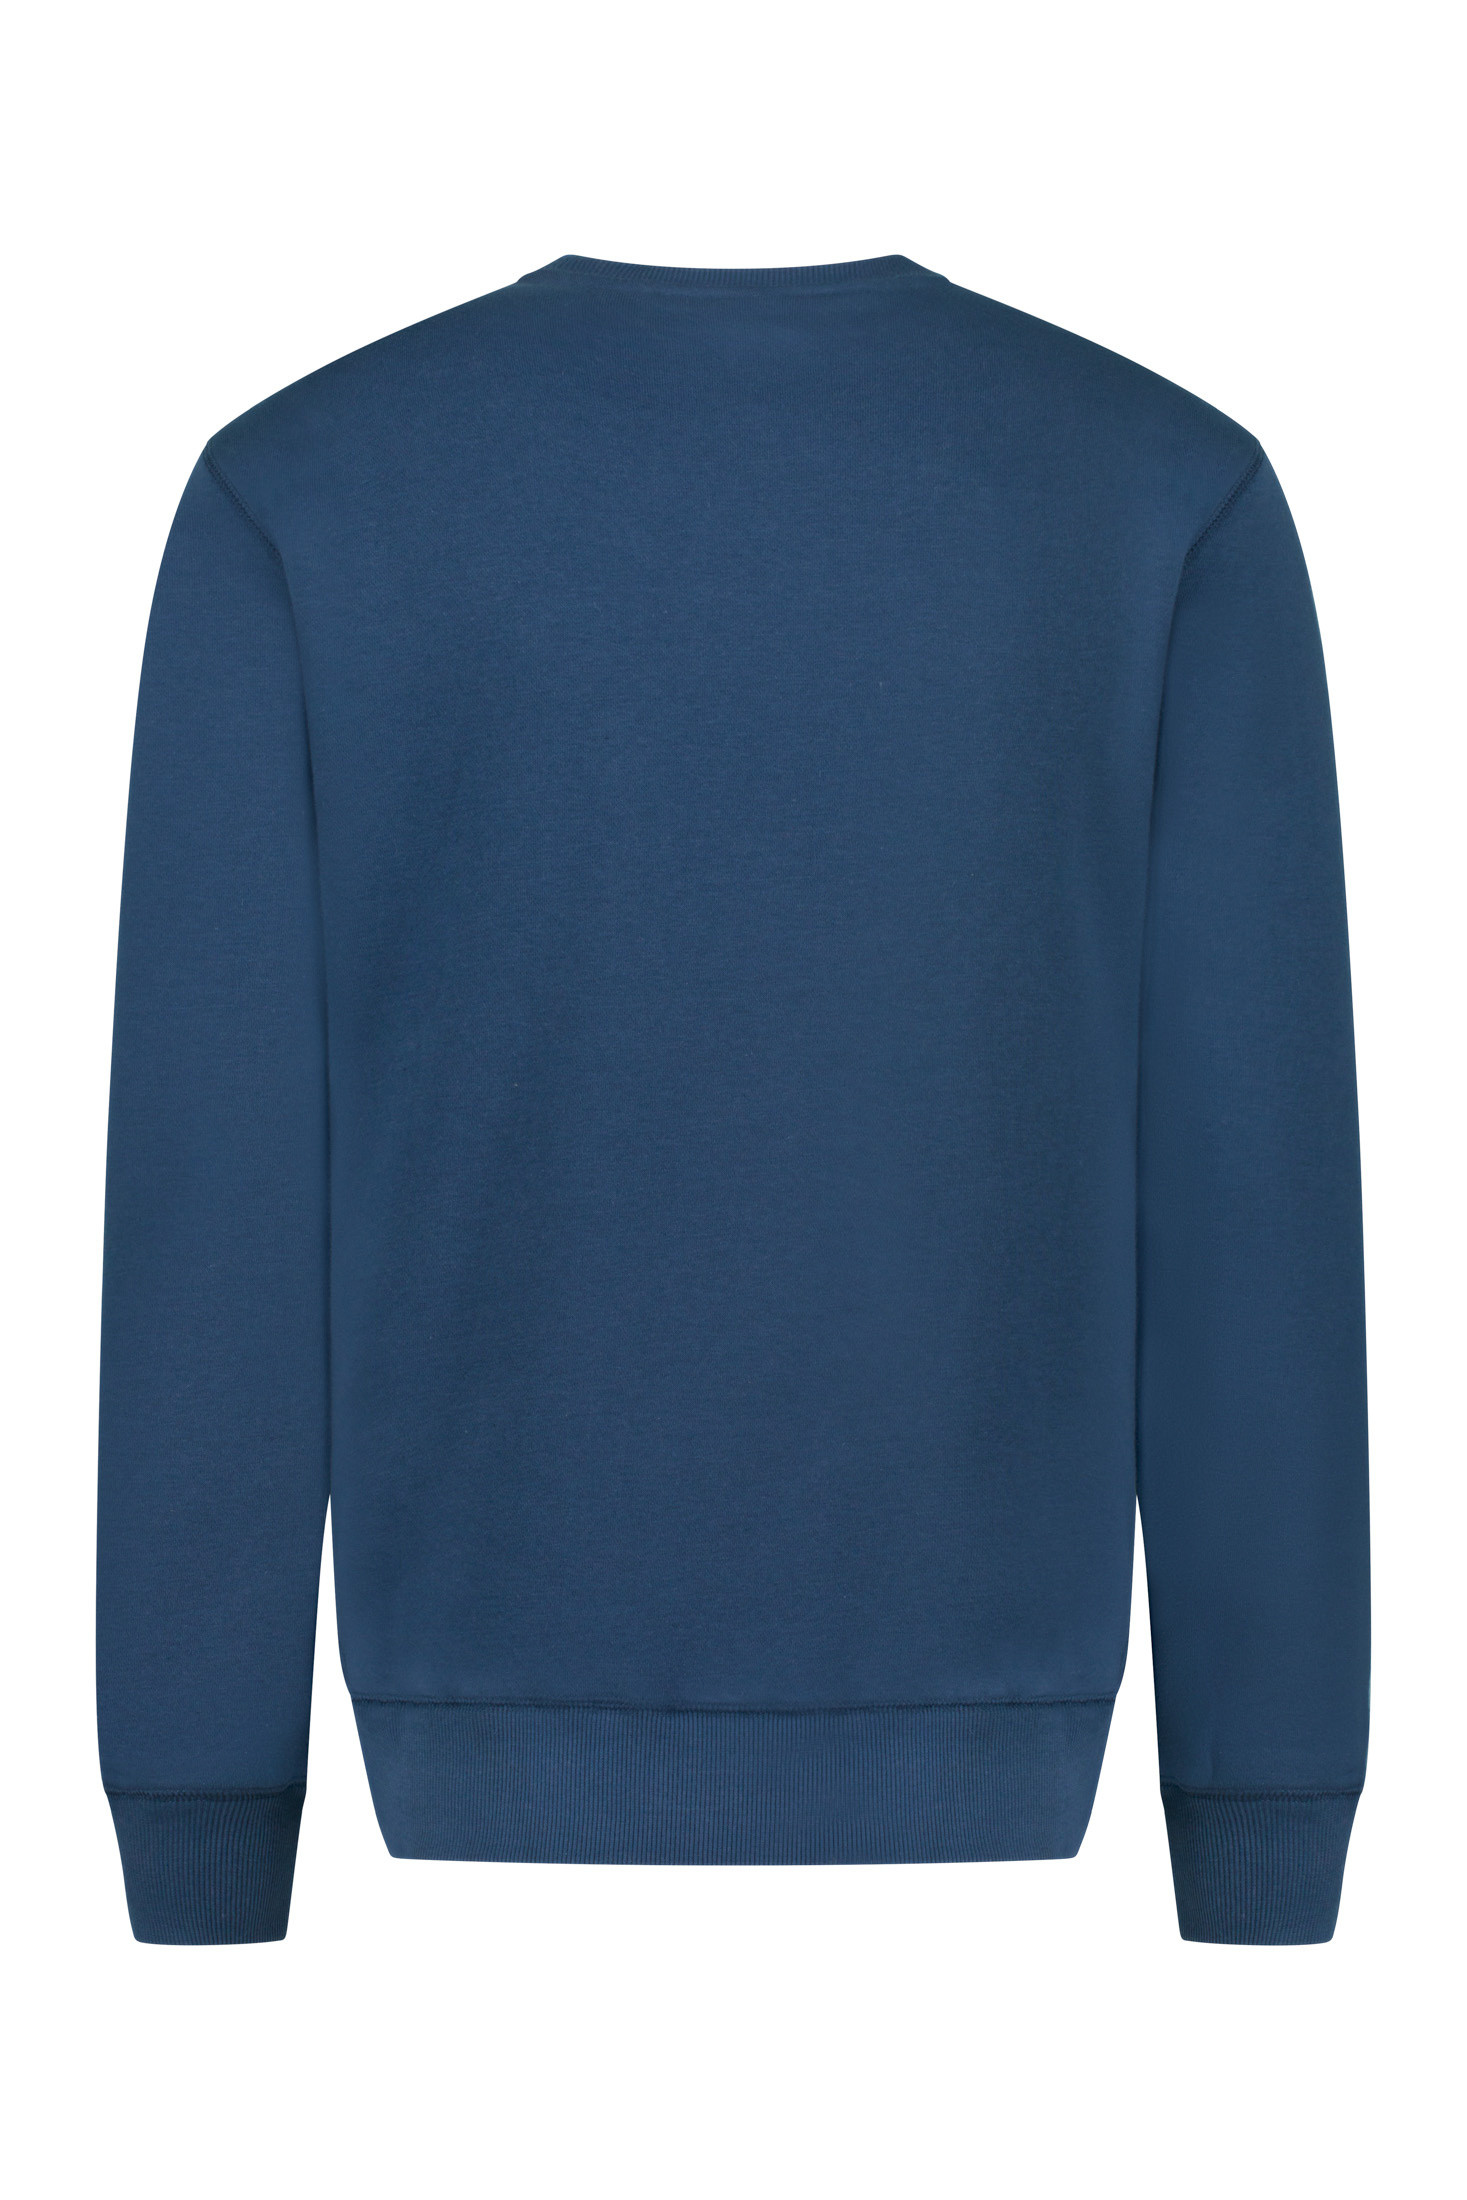 Russell Athletic - Sweatshirt with embroidery, Blue, large image number 1